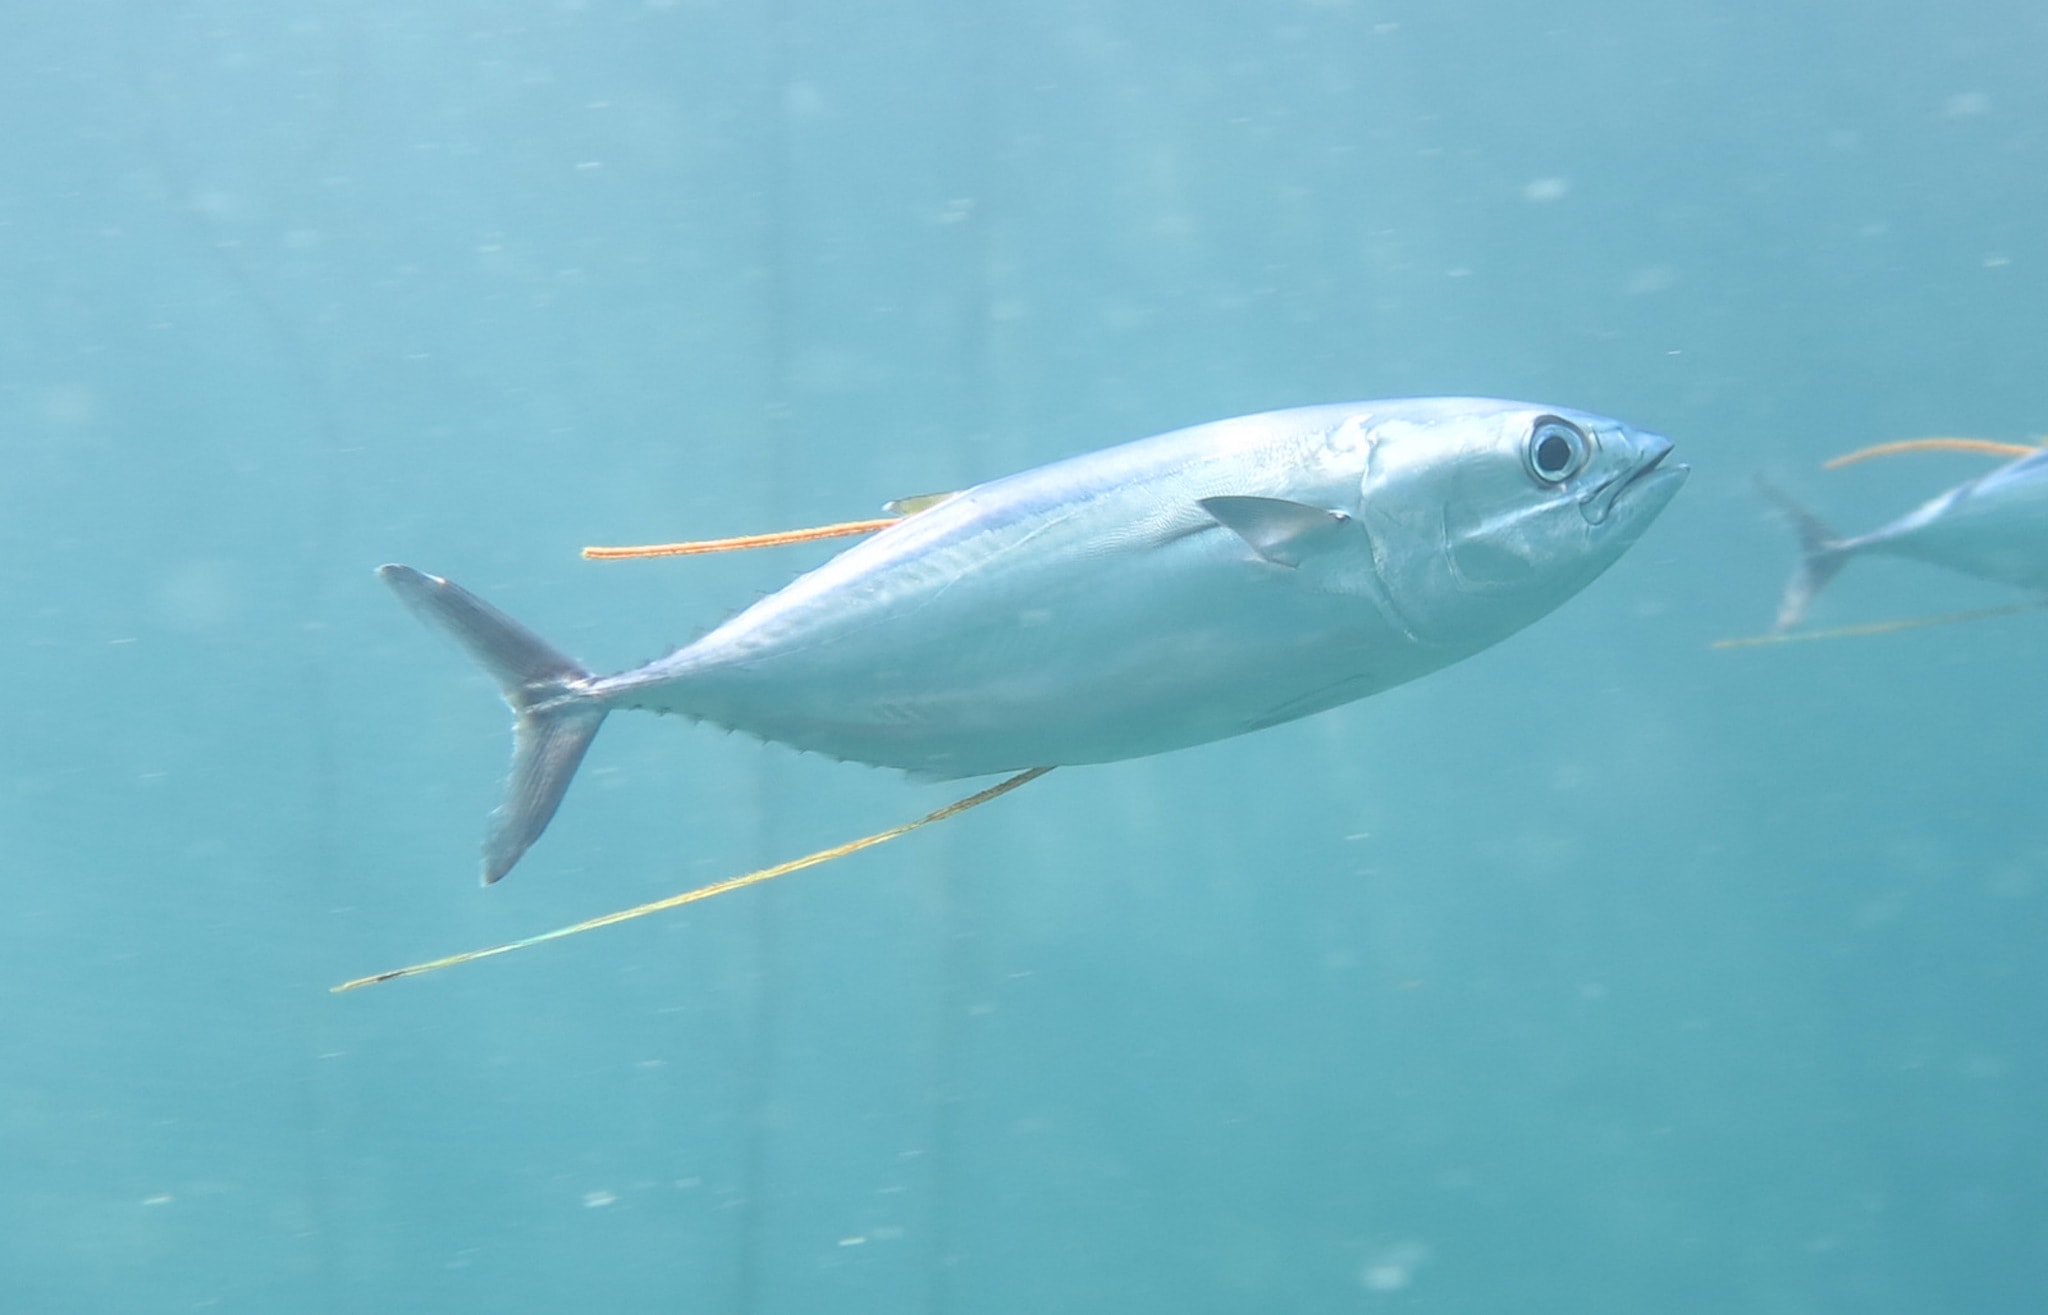 More than 12,000 baby Pacific bluefin tunas have been tagged by Japanese scientists. Photo courtesy of Dr. Ko Fujioka.